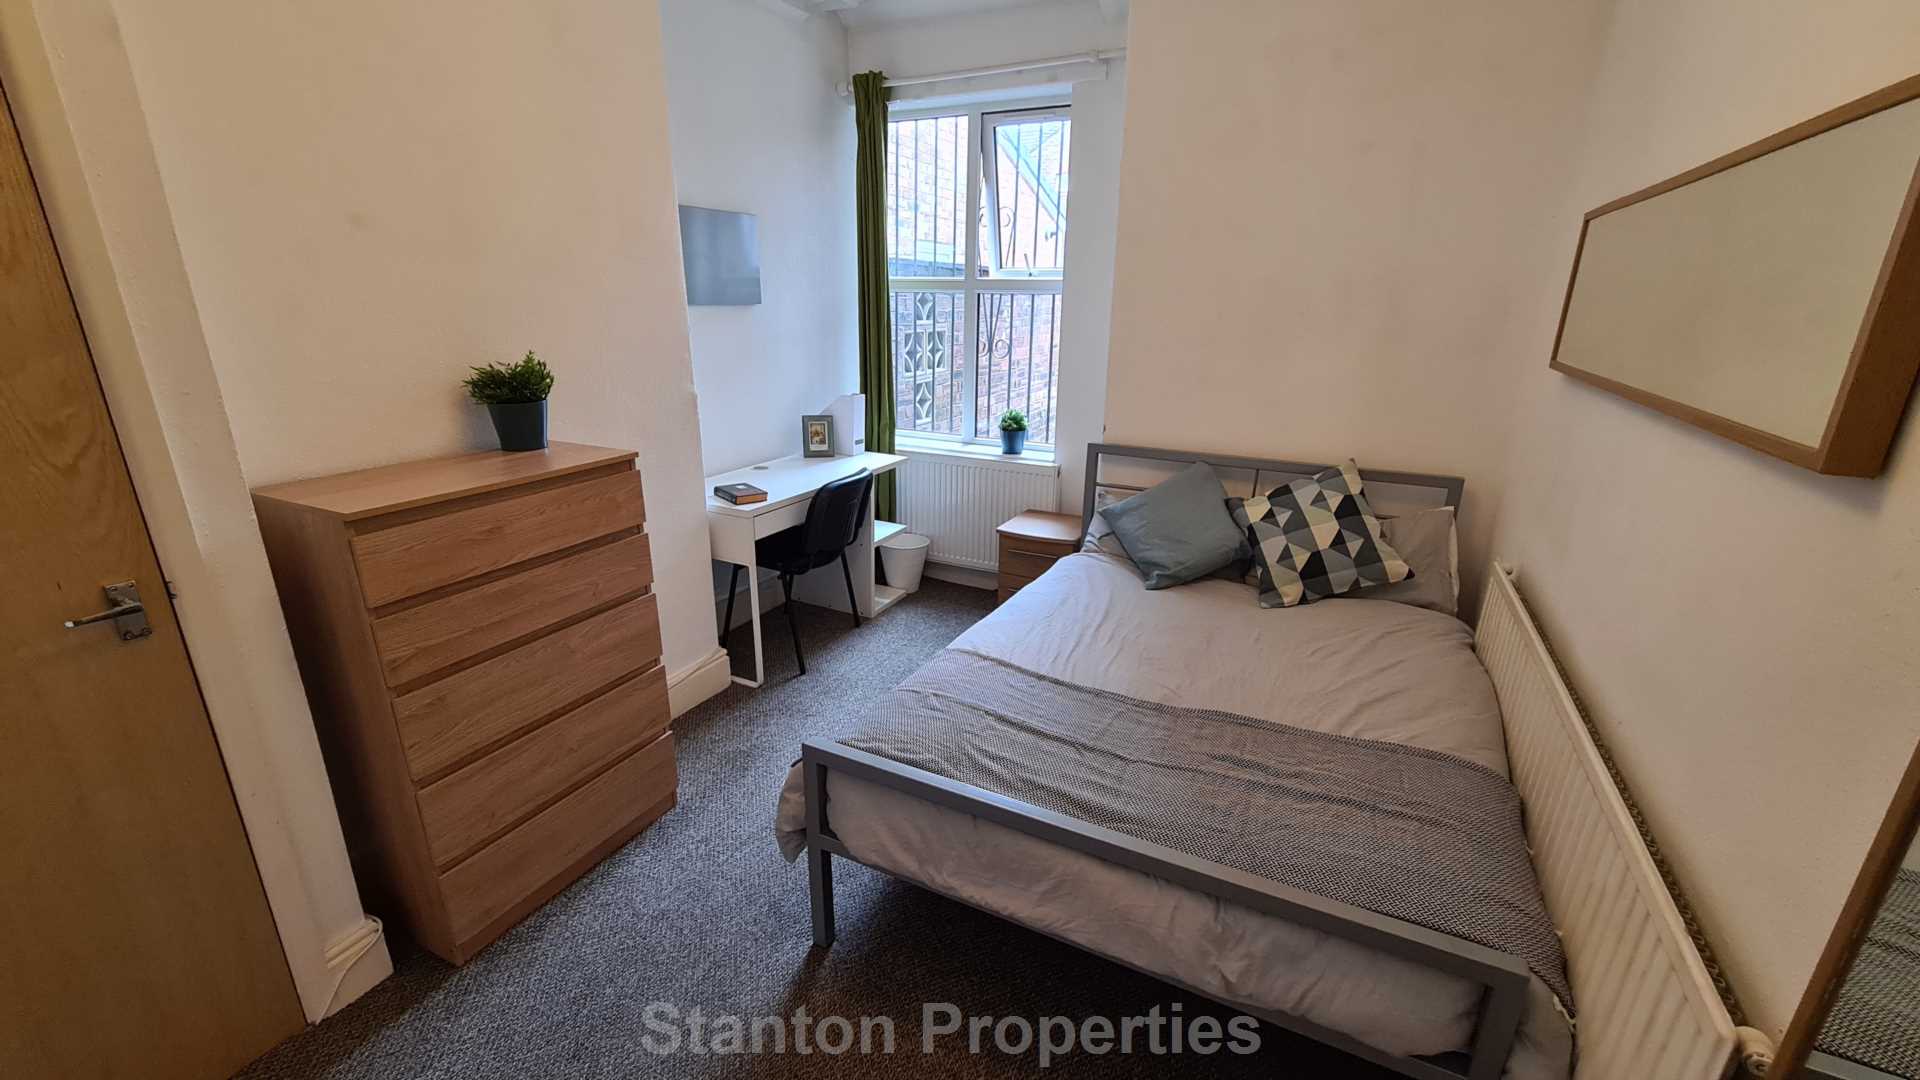 £130 pppw, See Video Tour, Mabfield Road, Fallowfield, Image 7